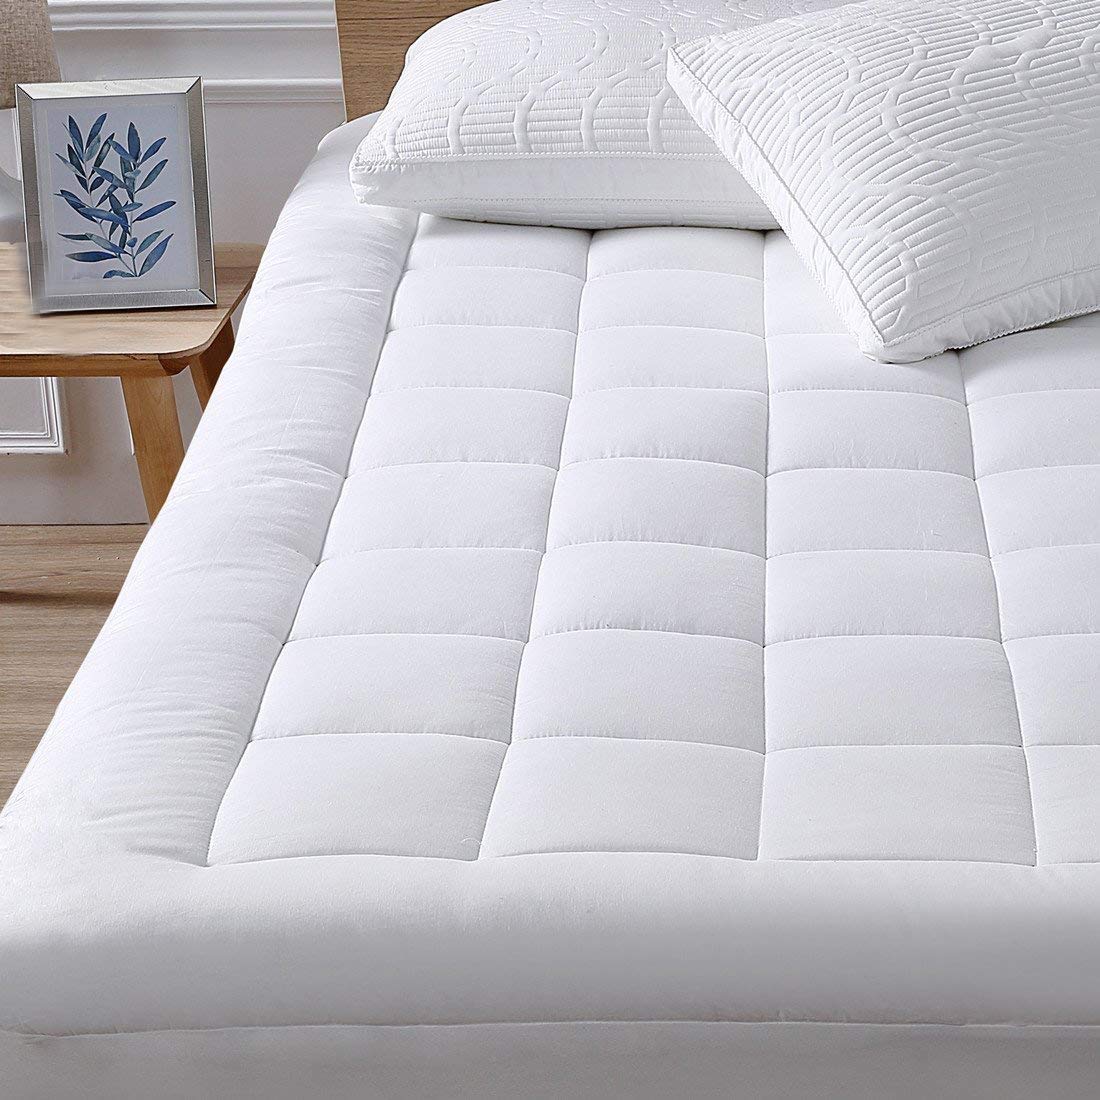 oaskys Mattress Pad Cover